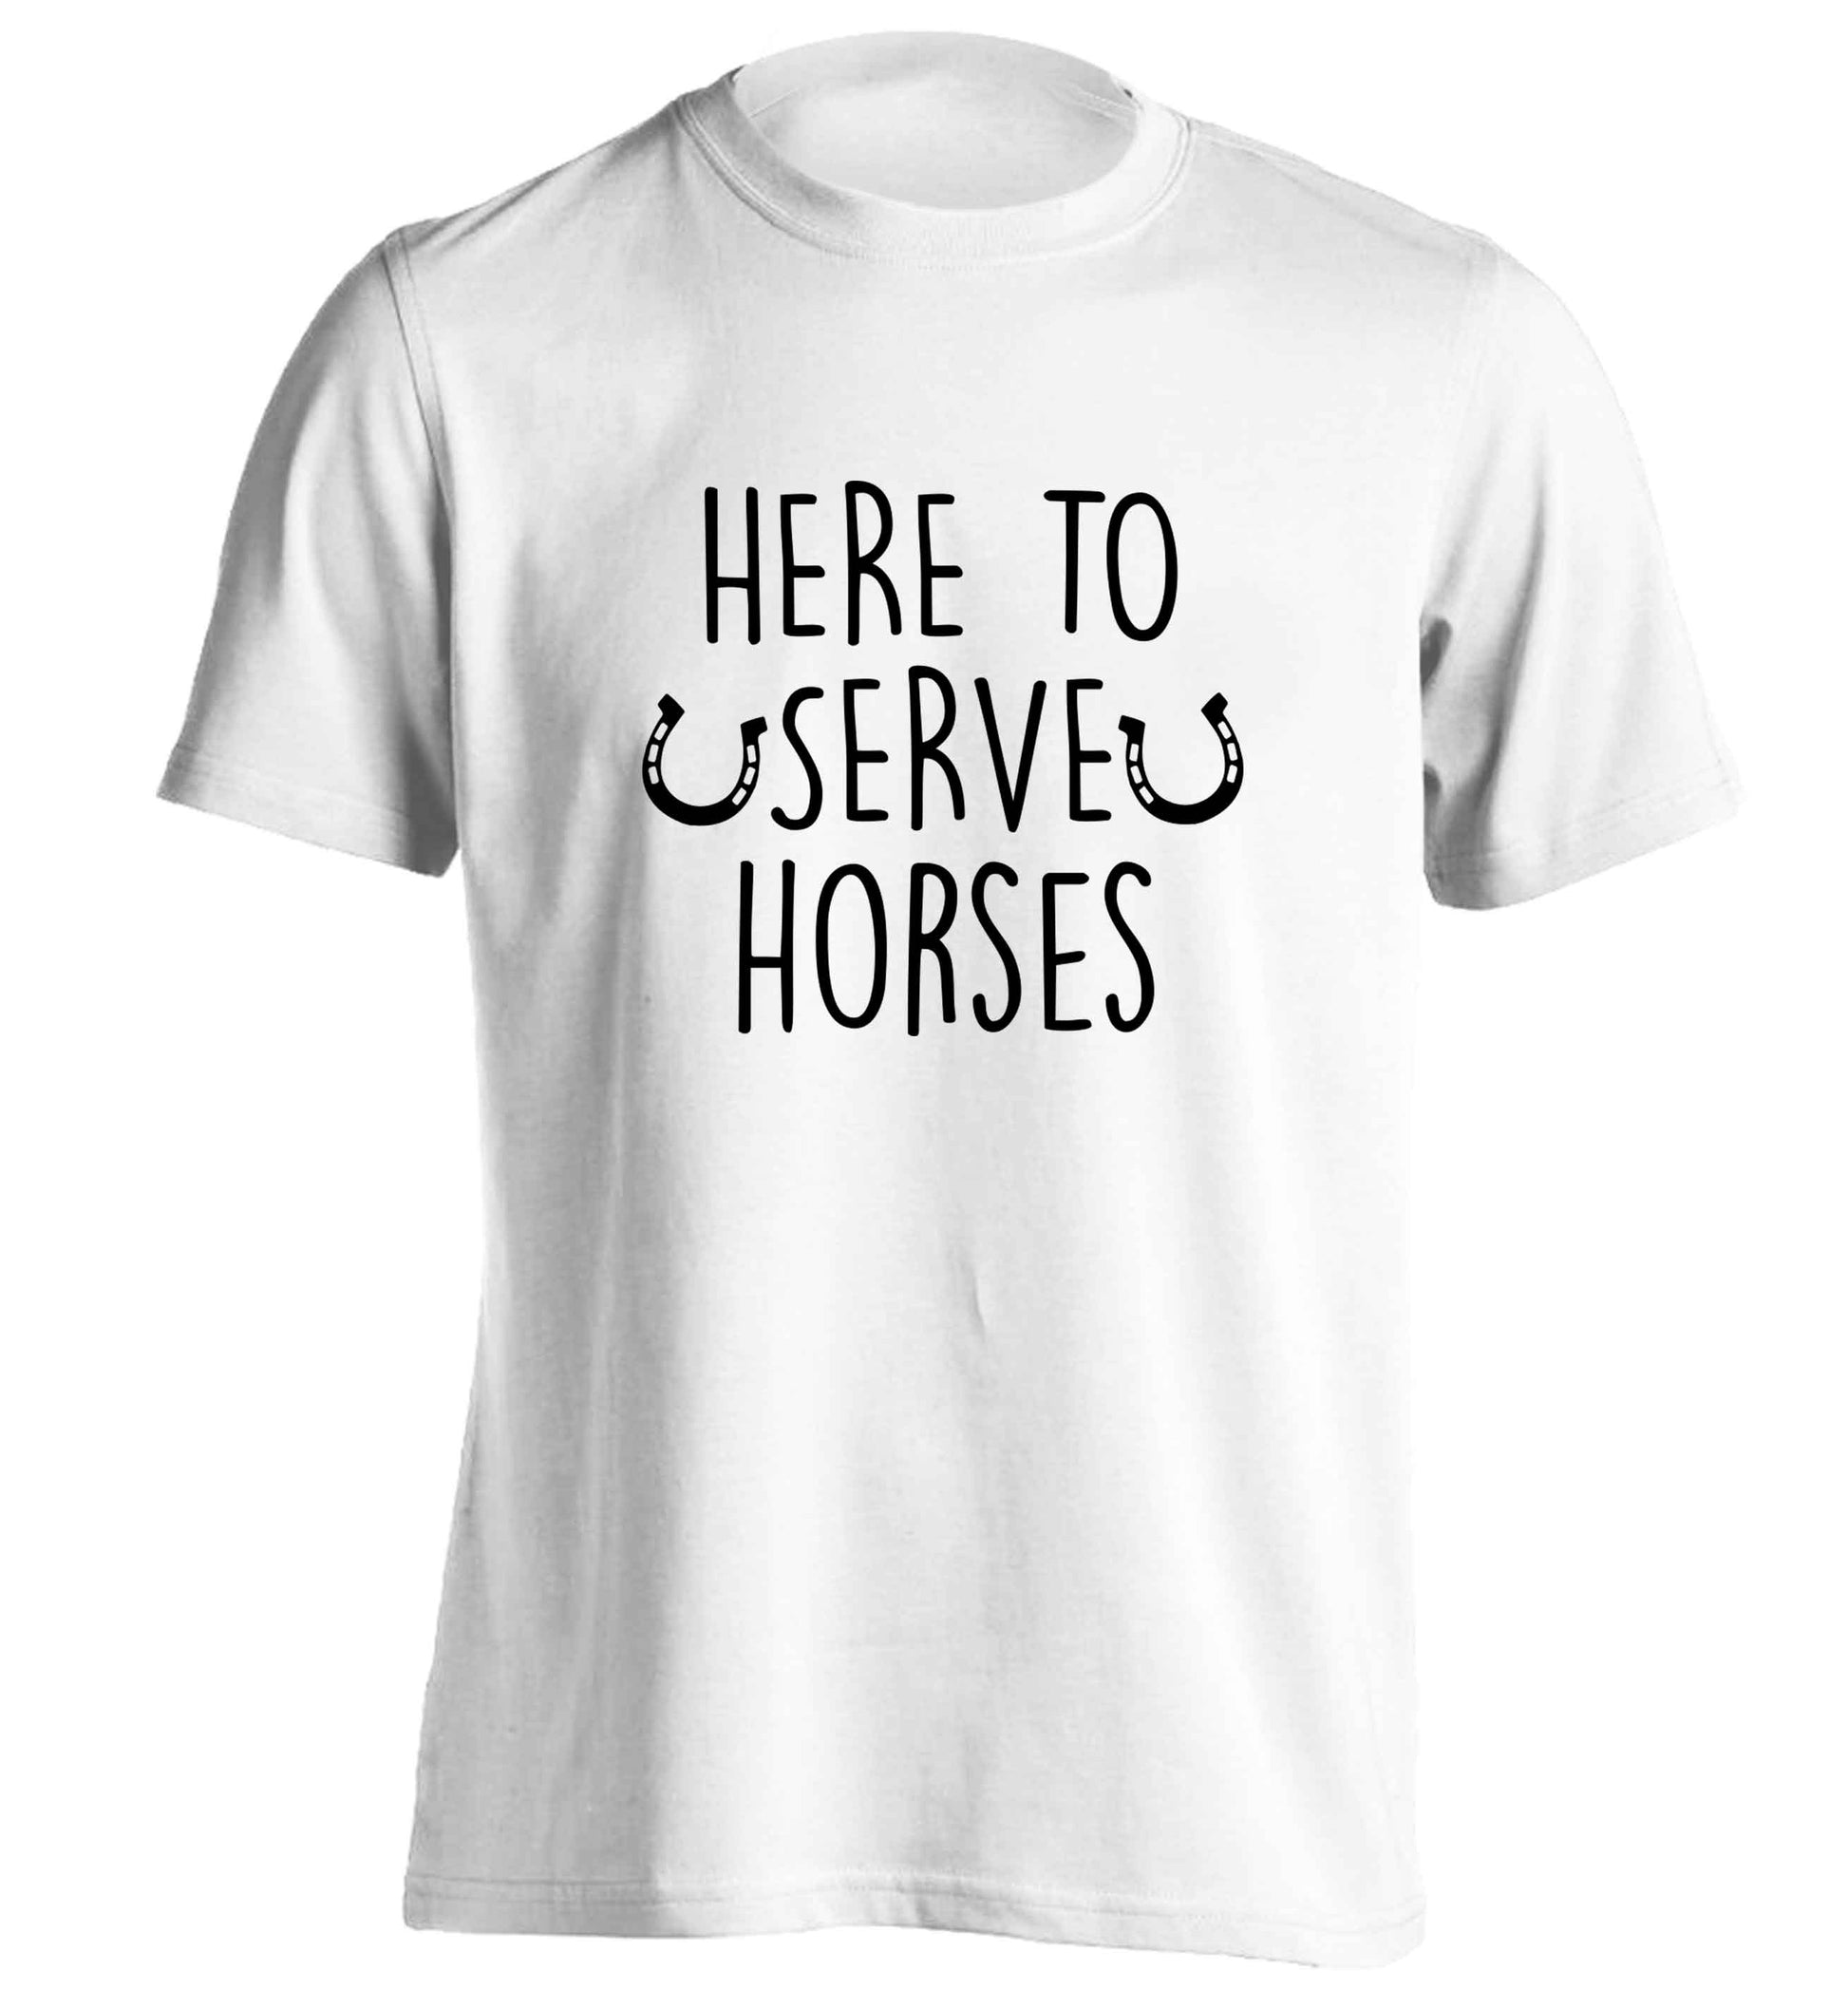 Here to serve horses adults unisex white Tshirt 2XL